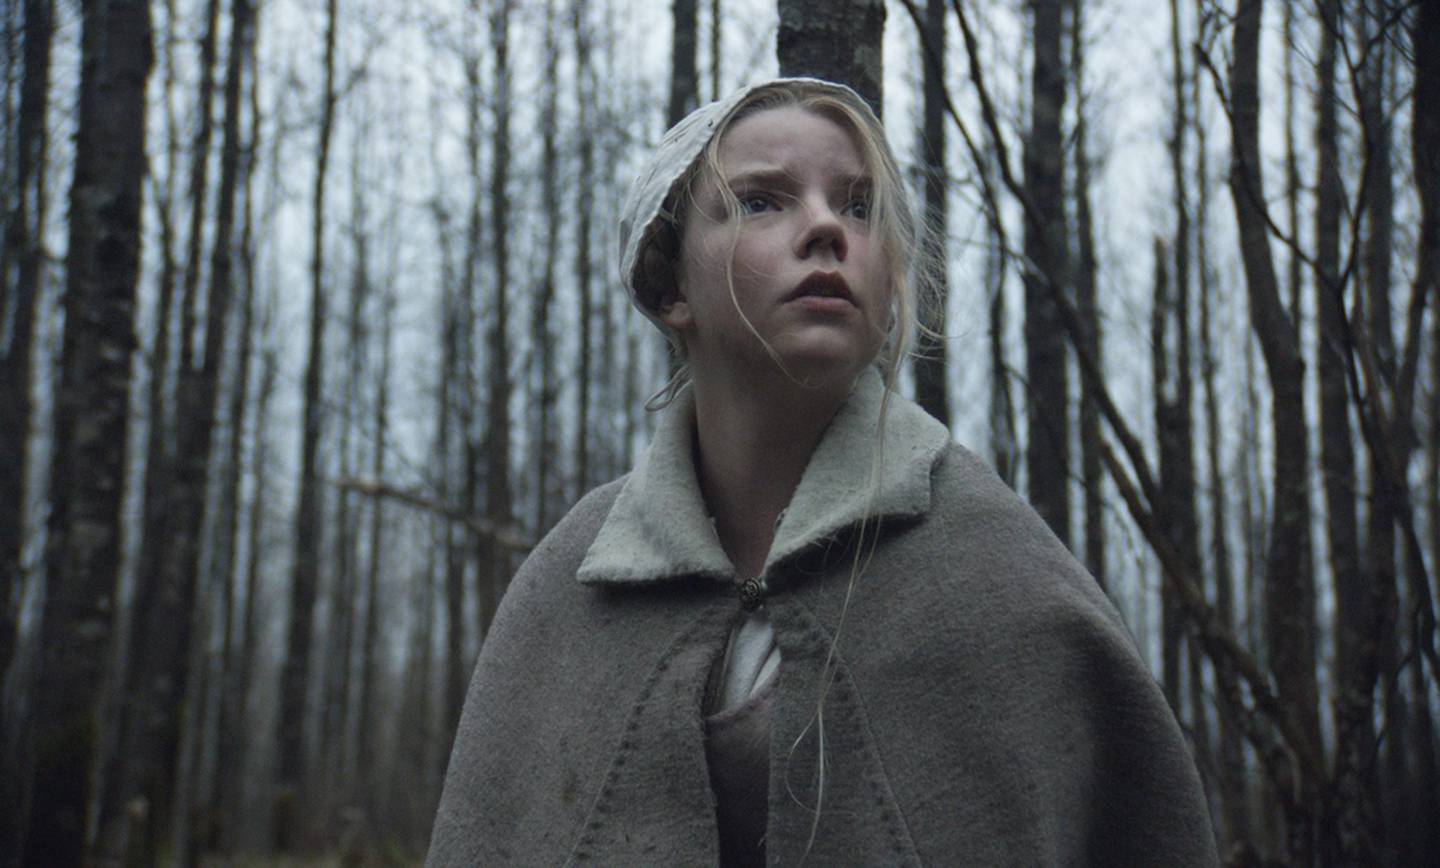 'The Witch', 2015, starring Anya Taylor-Joy, is credited with establishing the term 'elevated horror', which some critics say is simply a modern rebranding of the traditional psychological horror genre. Photo: A24